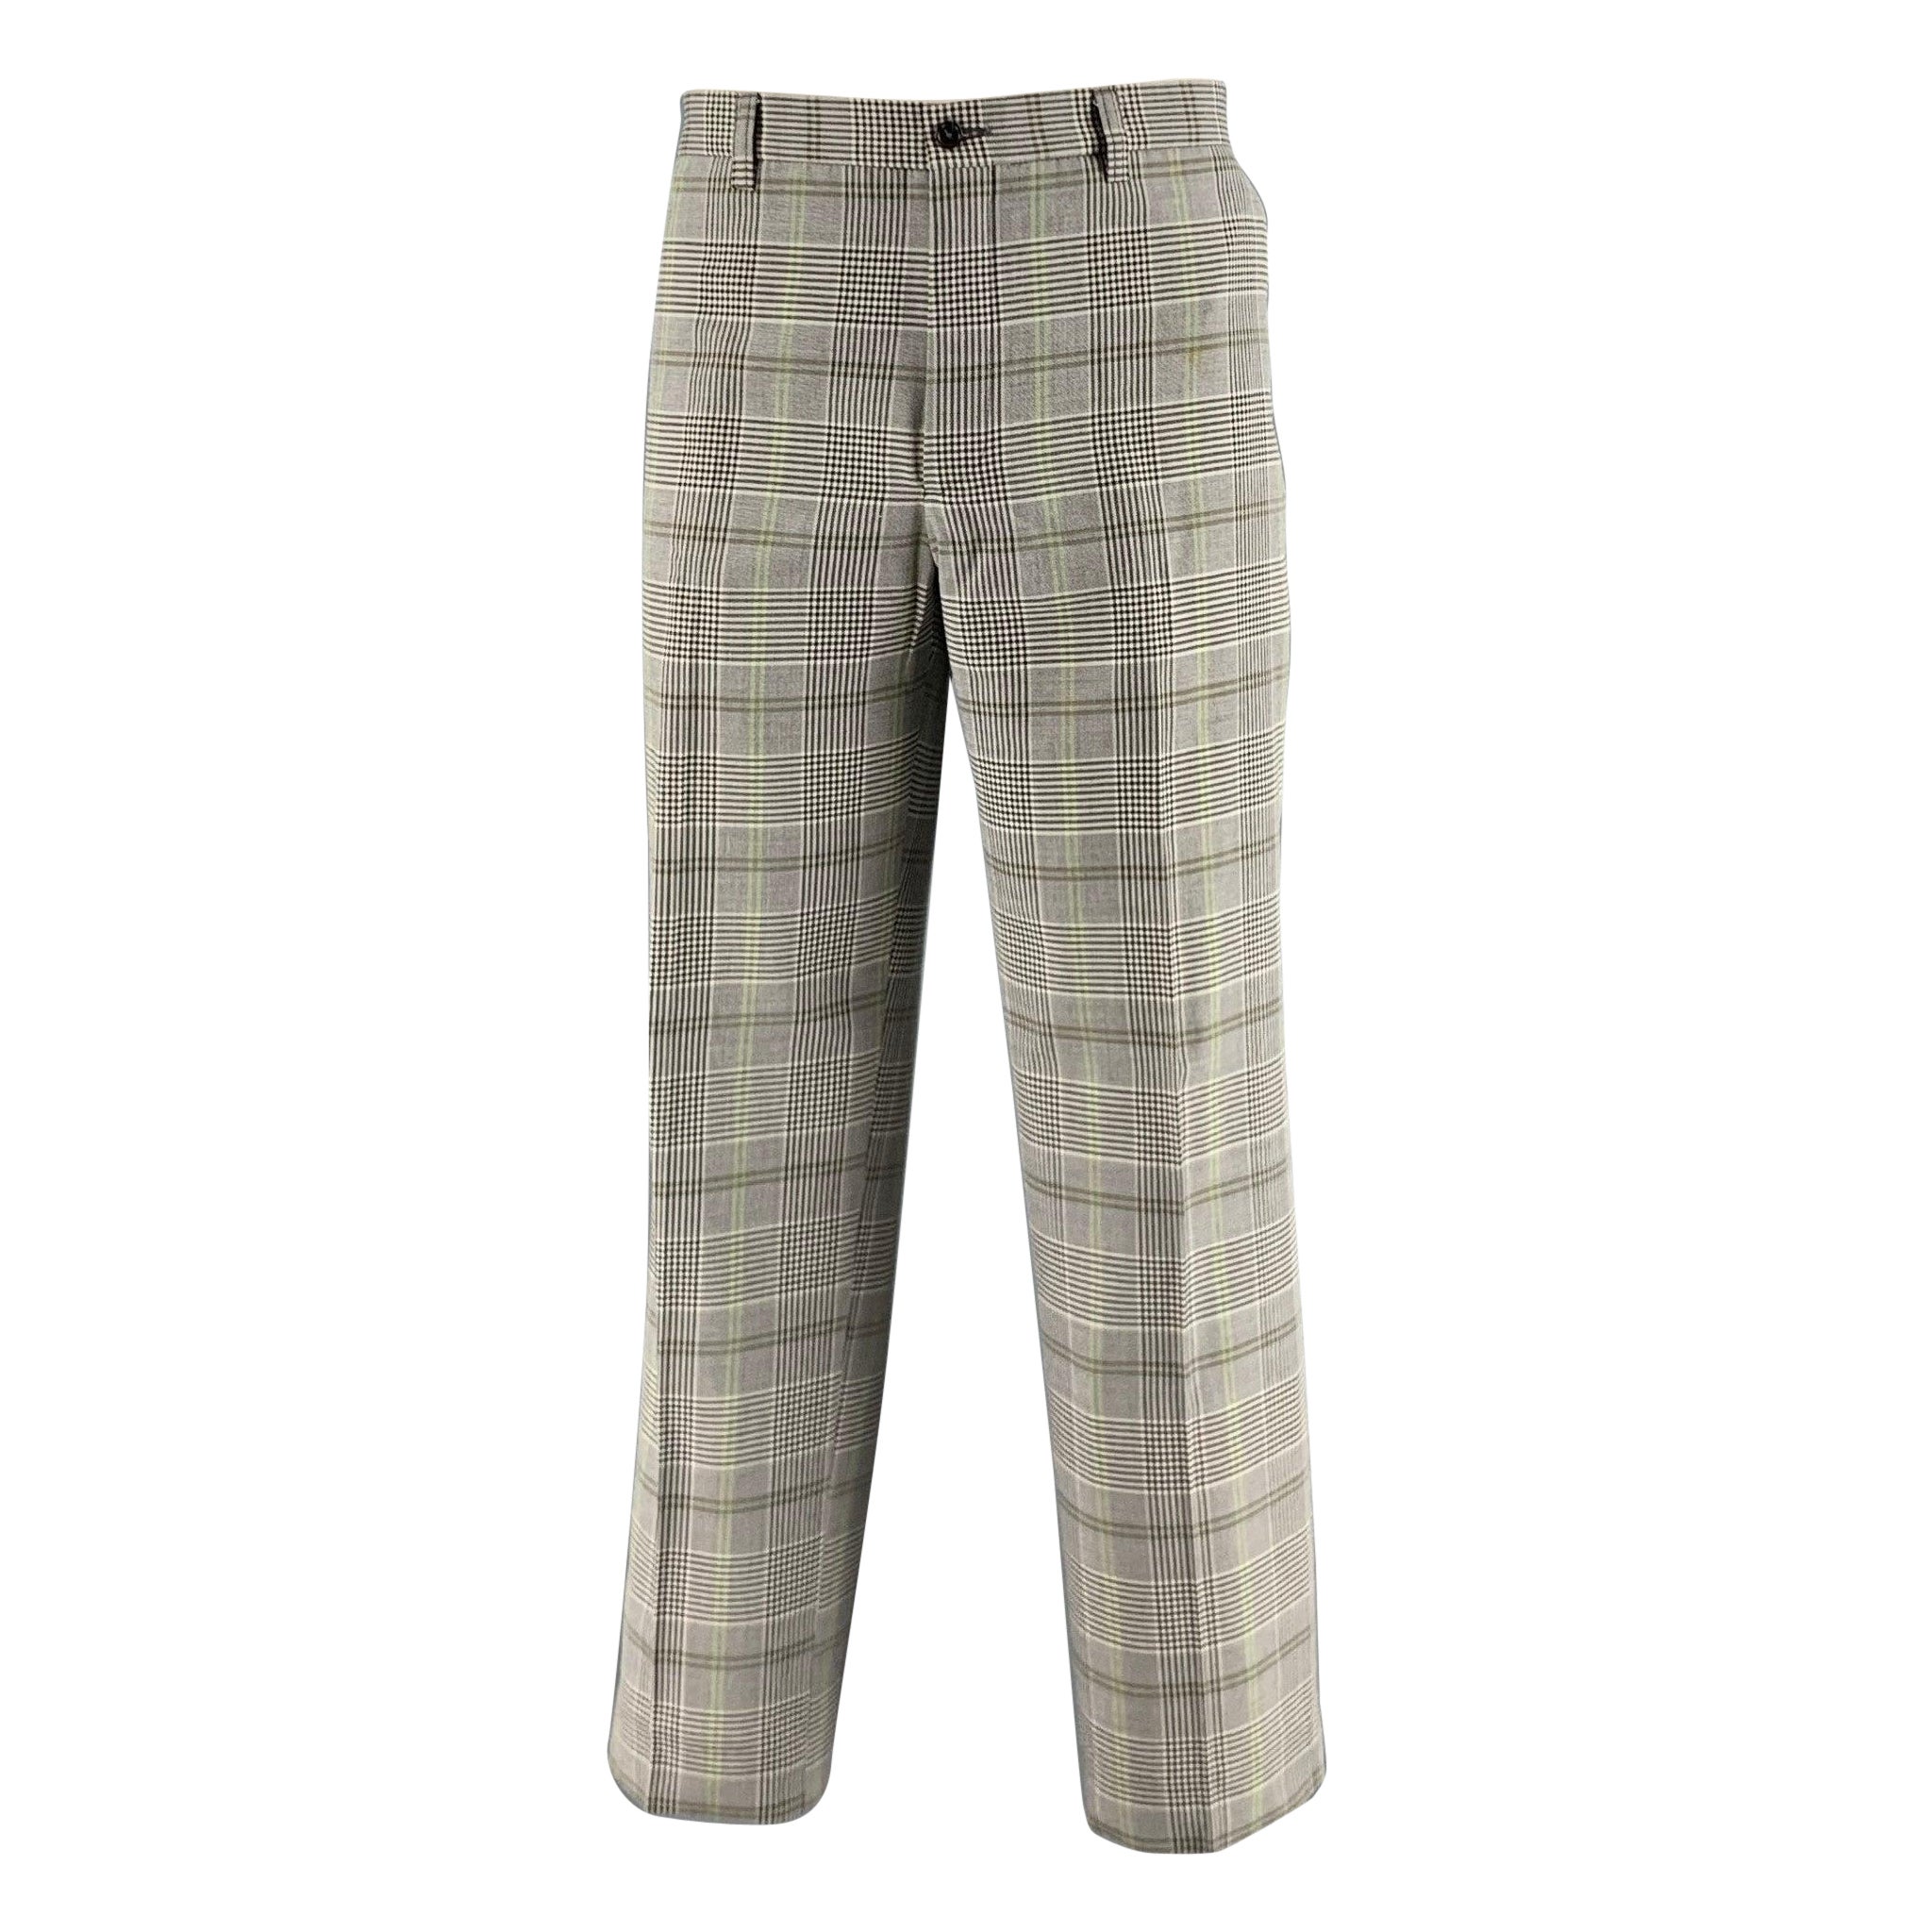 ETRO Size 36 White Black & Green Plaid Wool Cotton Zip Fly Dress Pants For Sale